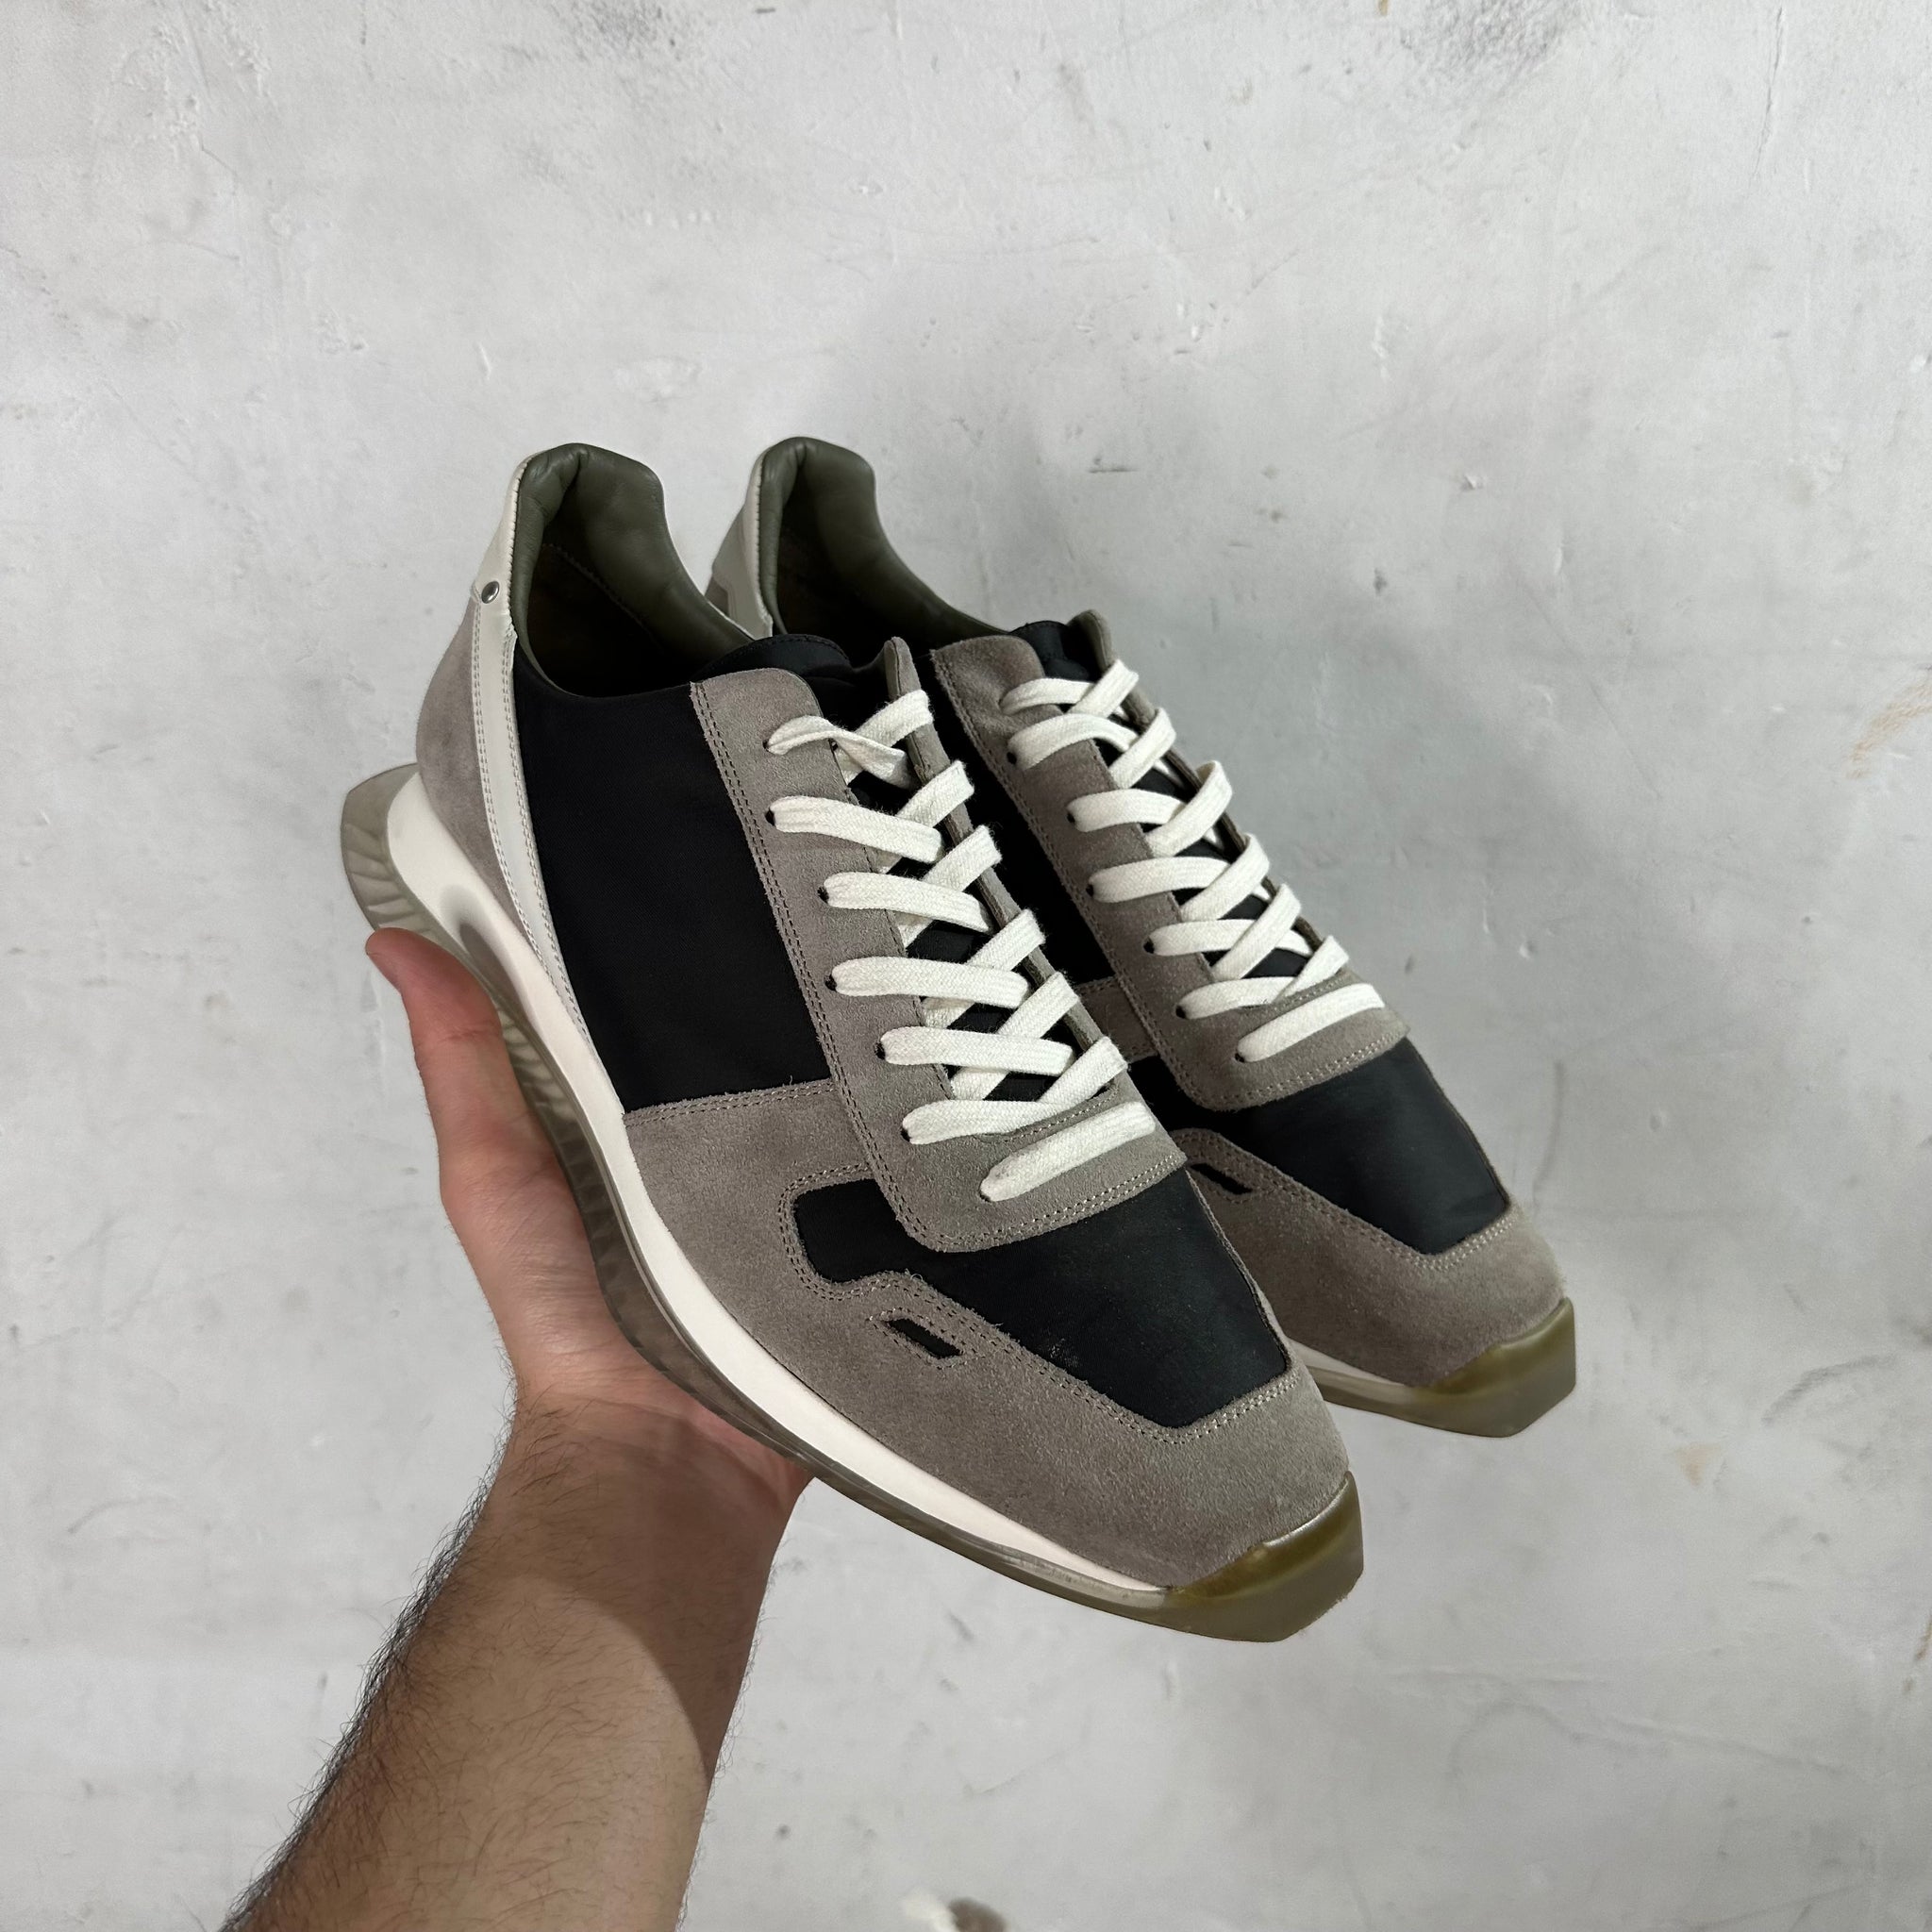 Rick Nylon Suede Trainers